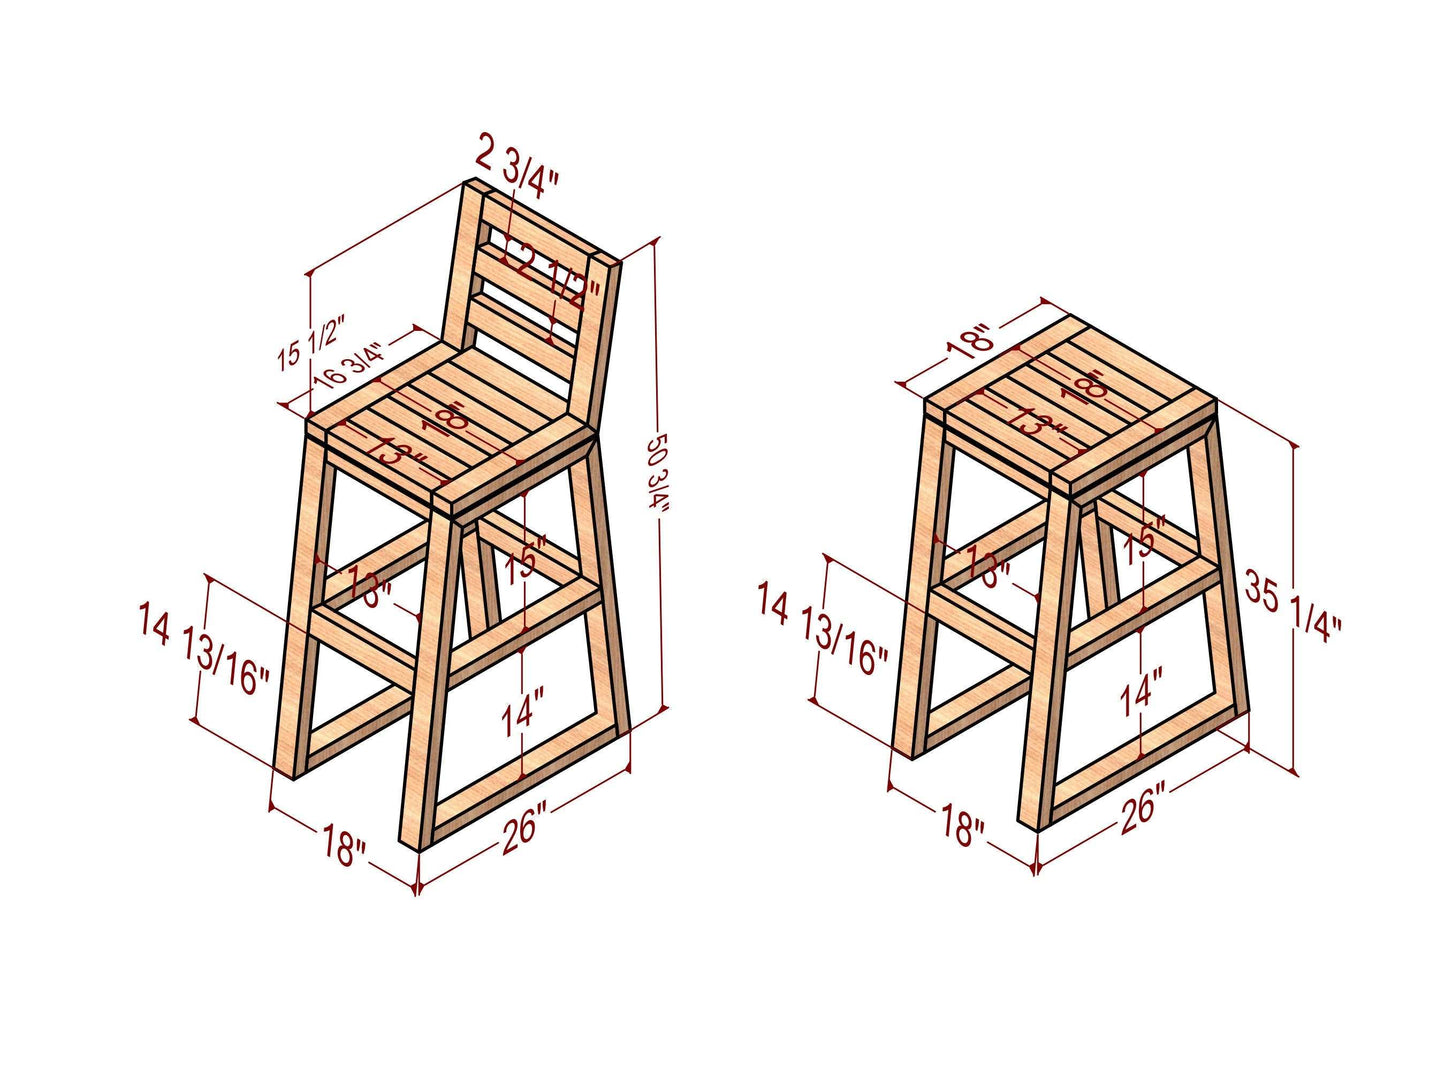 360 degree swivel chair plans, chair with stool plan, bar stool plans